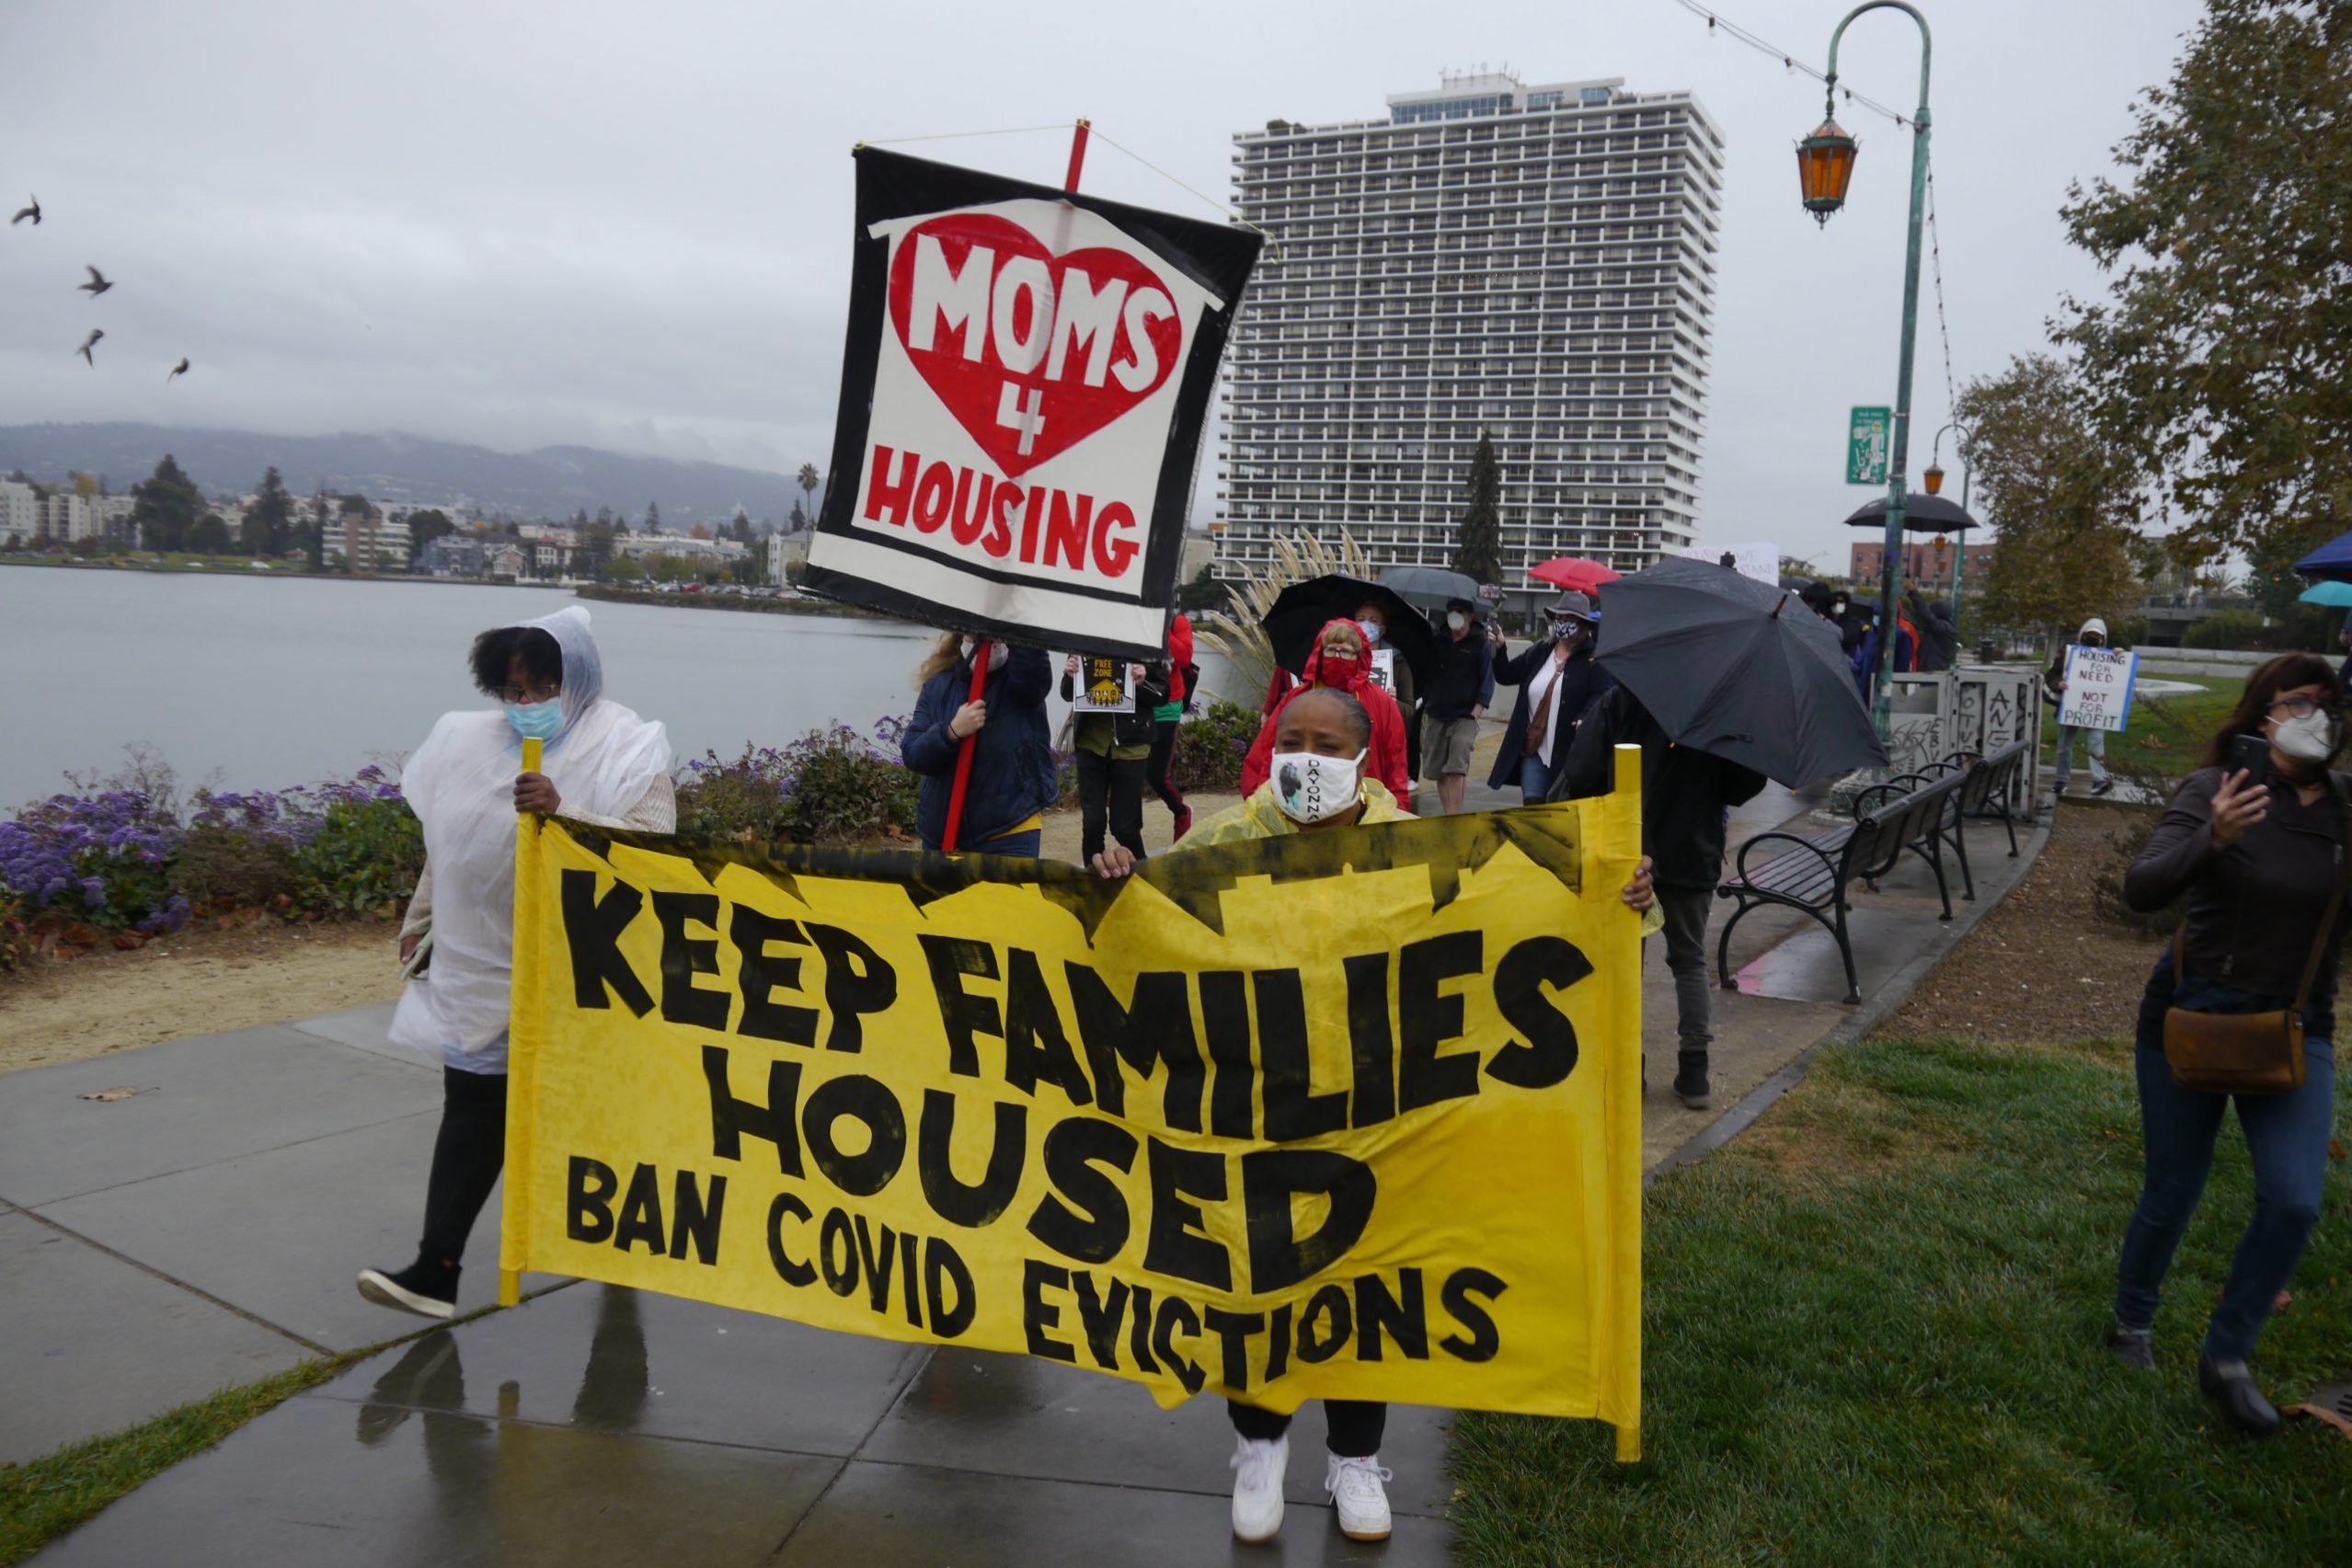 Participants of a Moms 4 Housing rally hold up signs that read "Keep Families Houses" and "Moms 4 Housing."